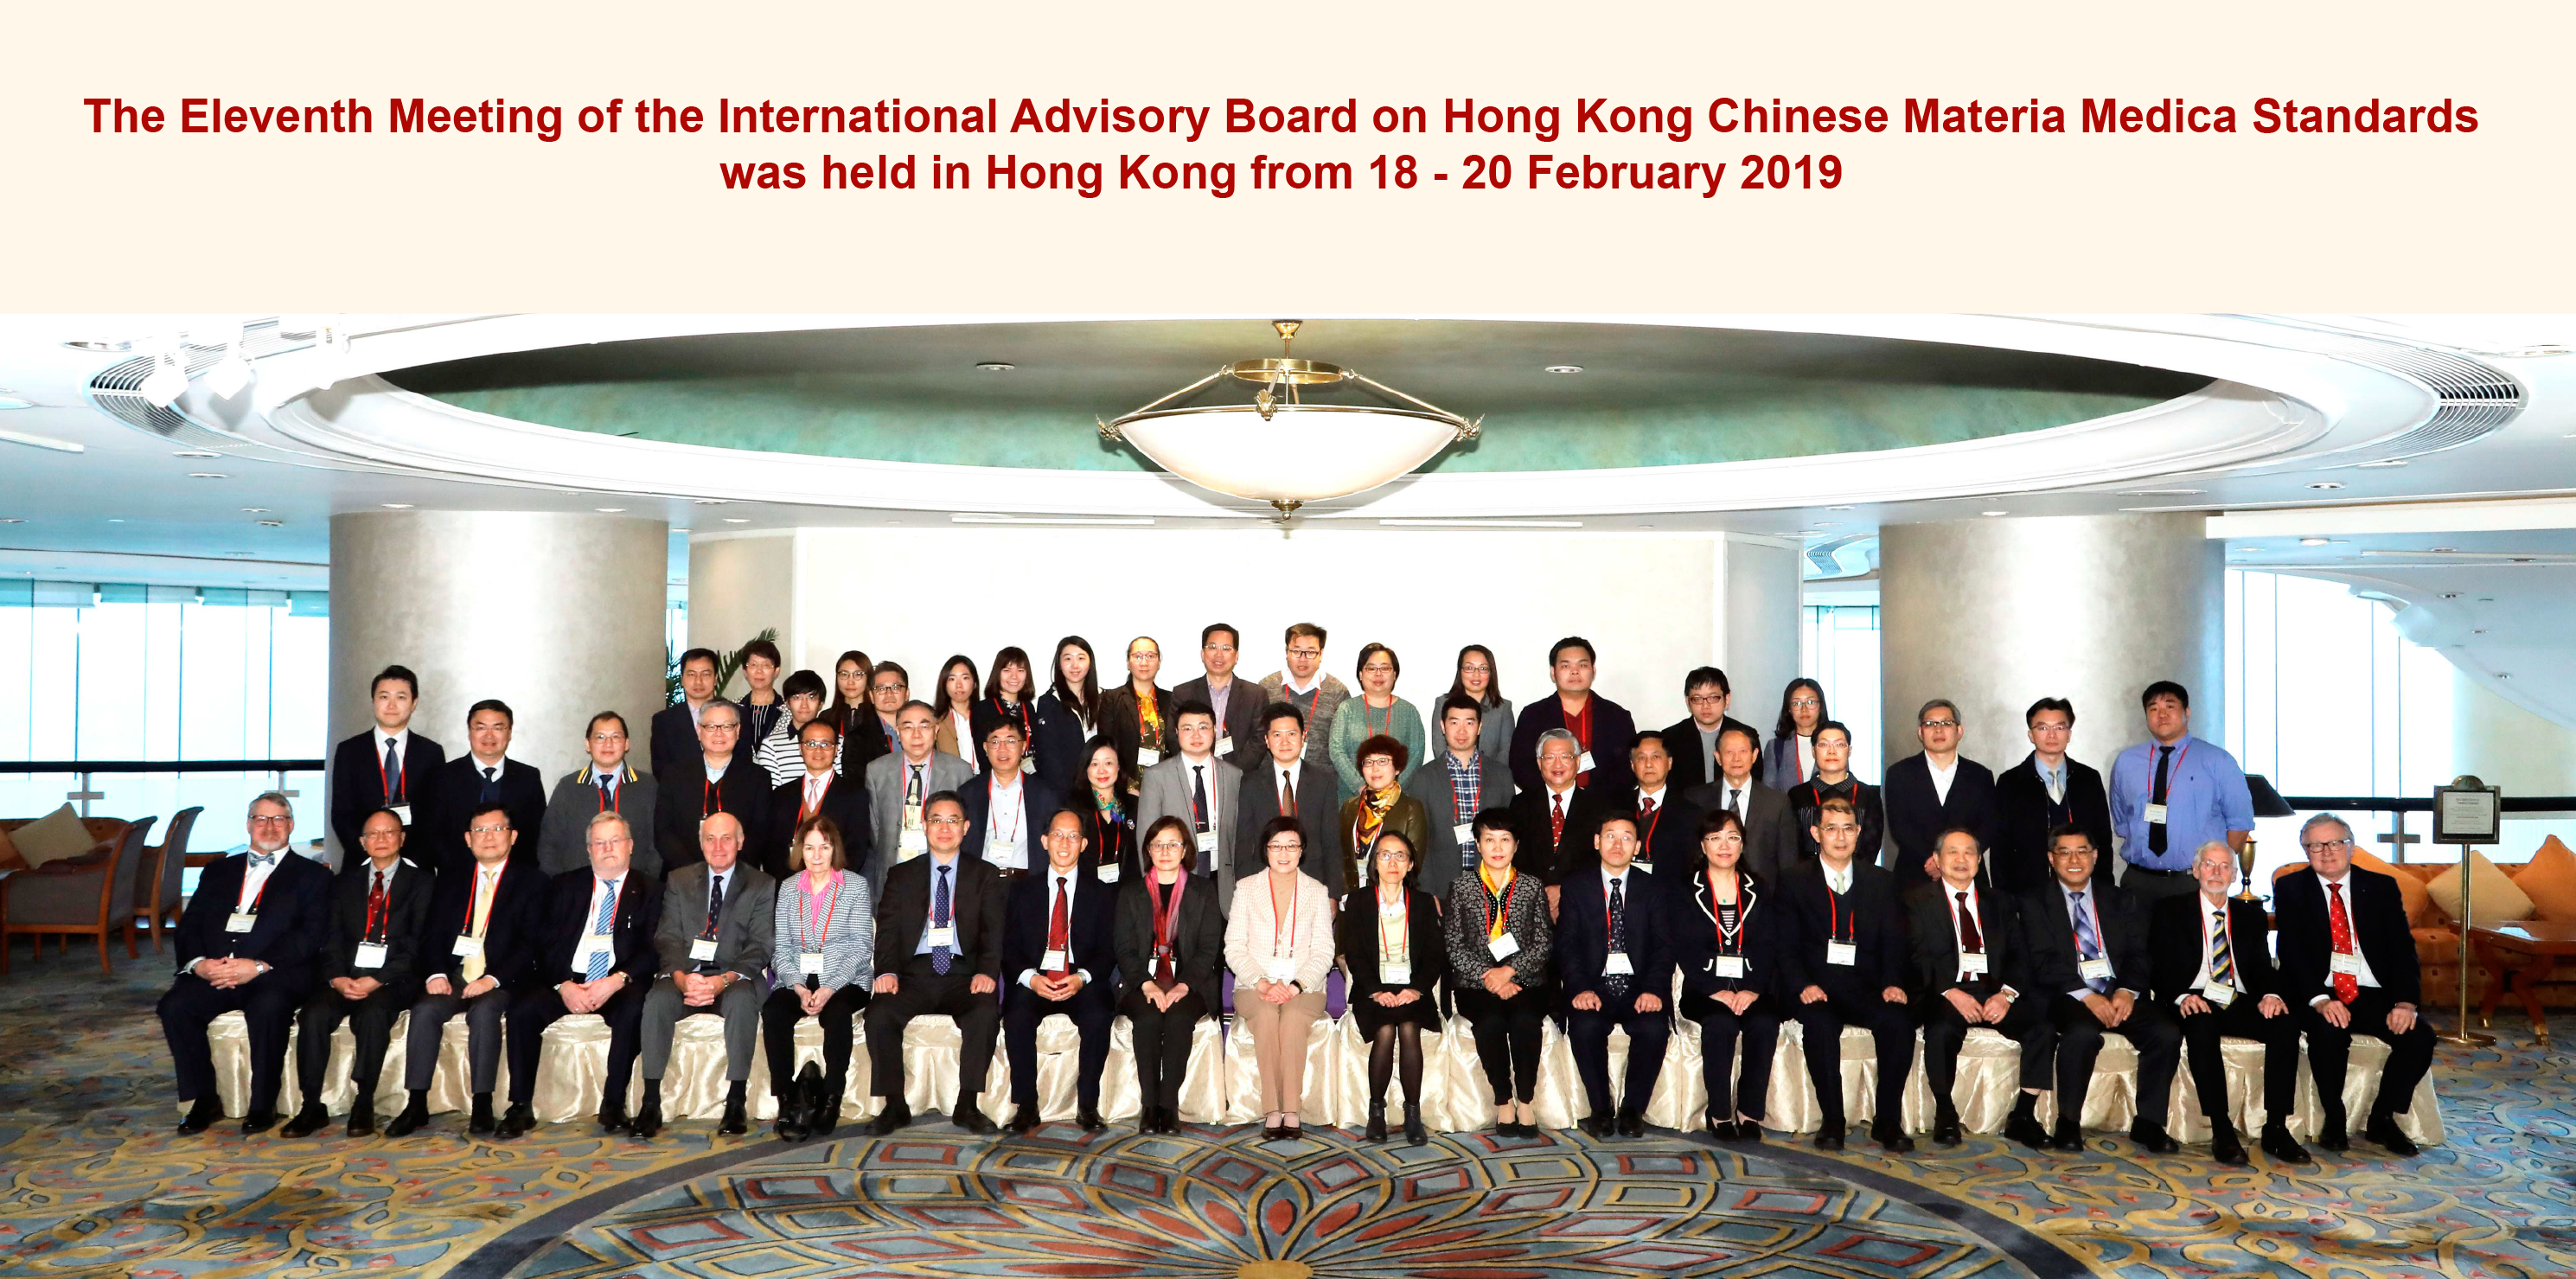 The Eleventh Meeting of the International Advisory Board on Hong Kong Chinese Materia Medica Standards was held in Hong Kong from 18 - 20 February 2019 